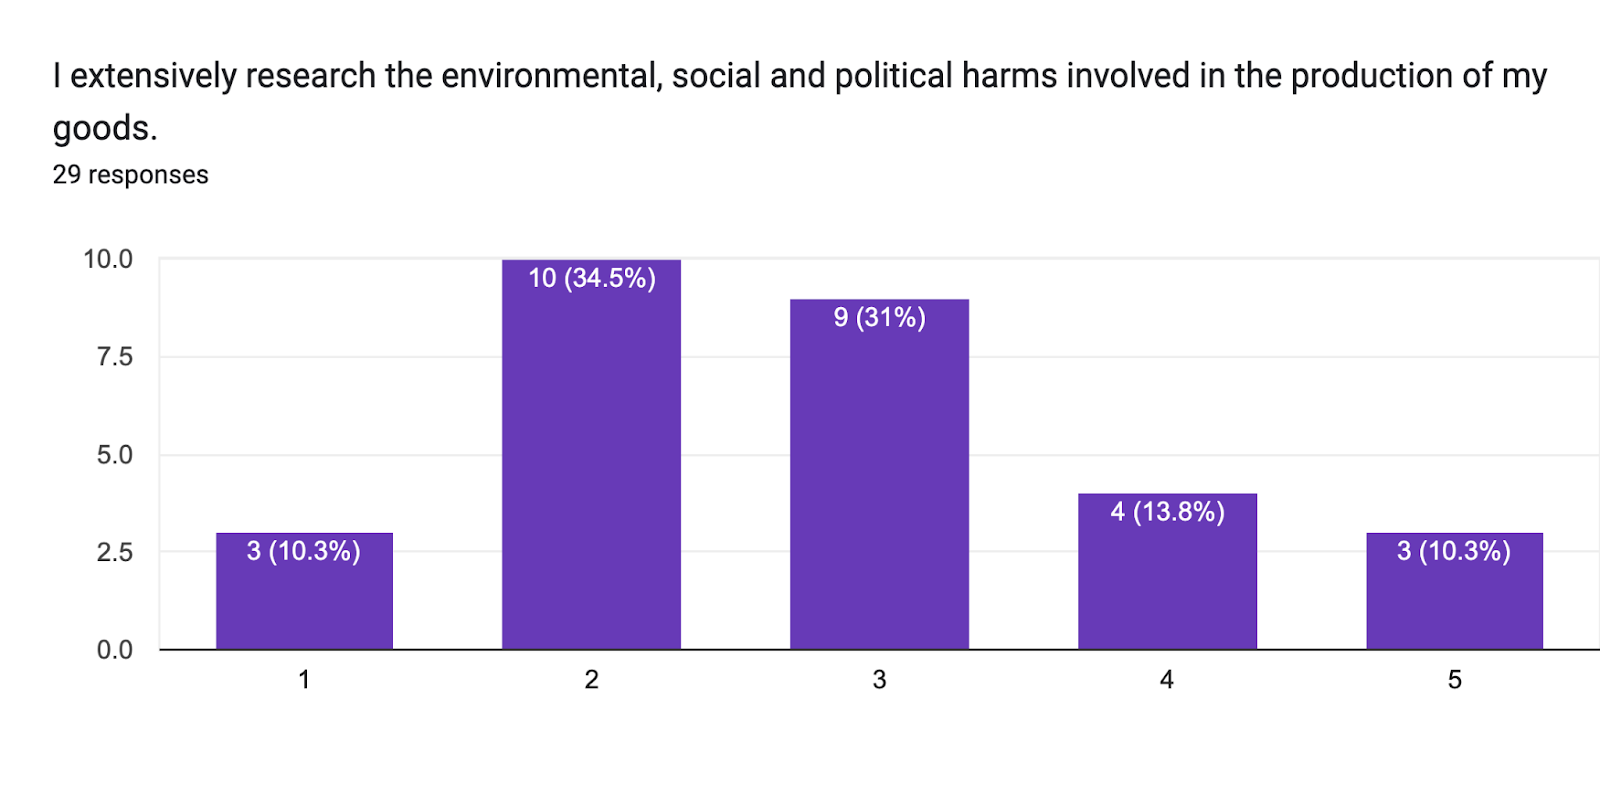 Forms response chart. Question title: I extensively research the environmental, social and political harms involved in the production of my goods. . Number of responses: 29 responses.